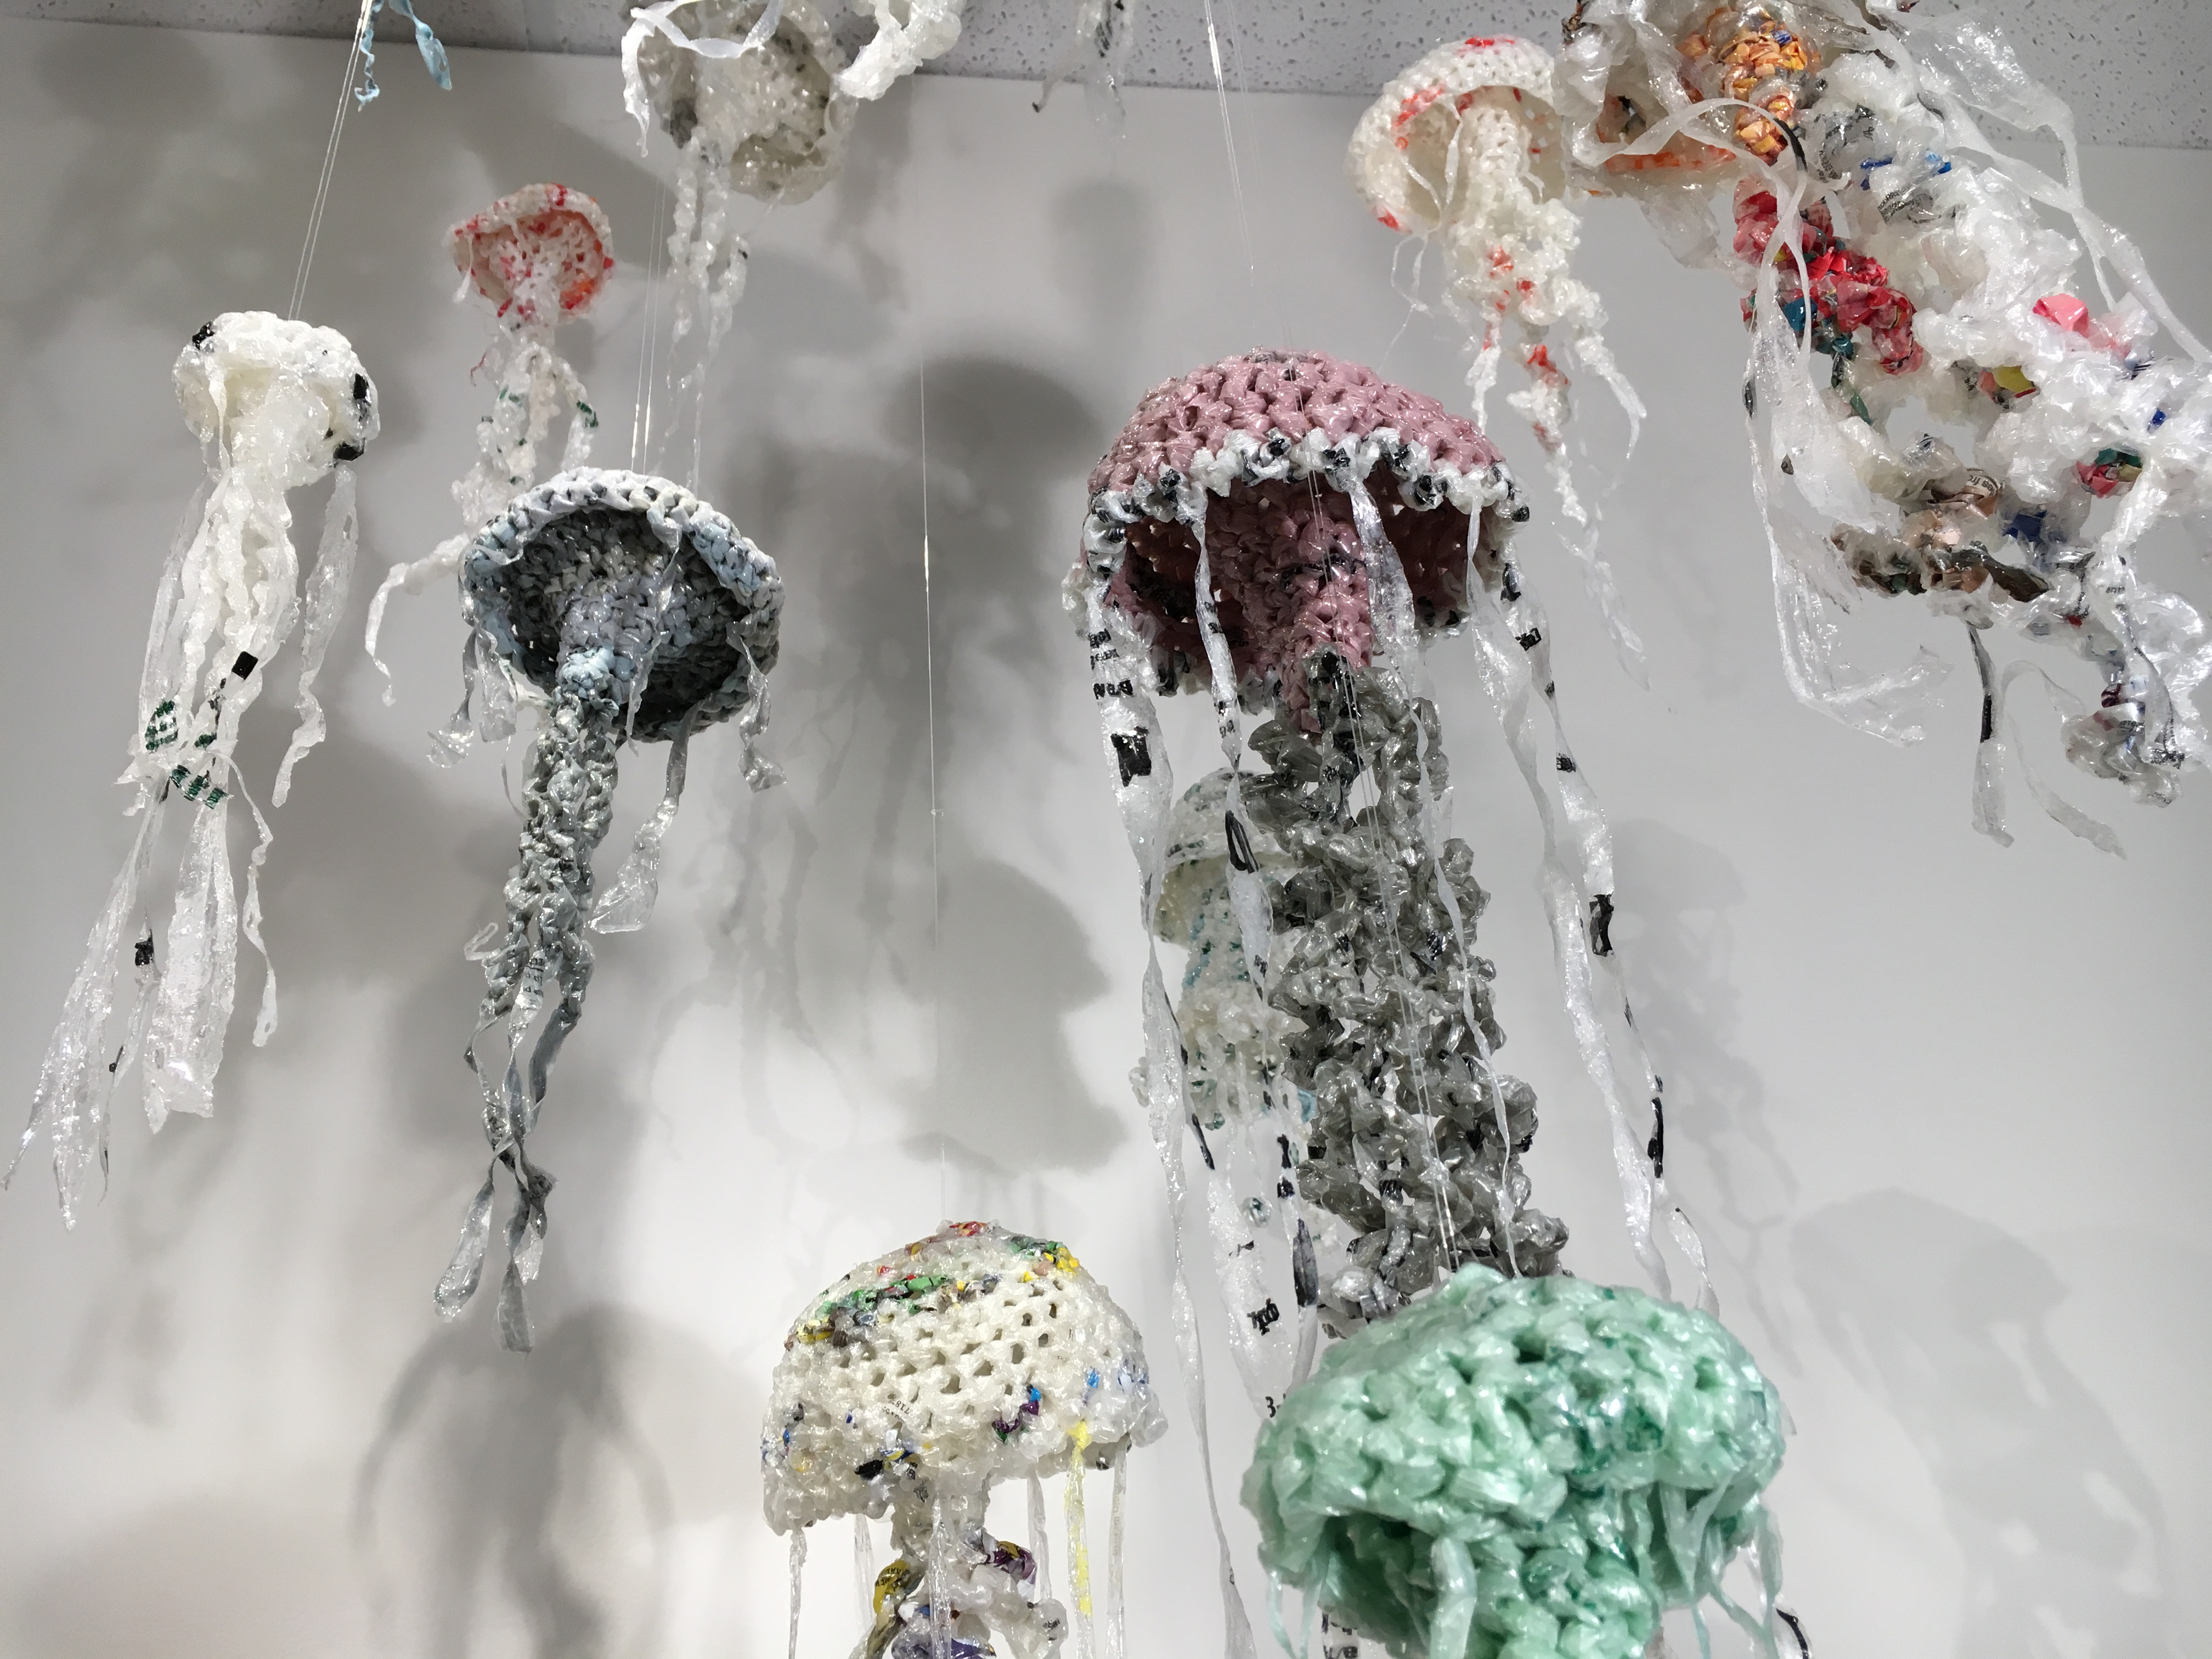 Jellyfish sculptures made of plastic hang from a ceiling